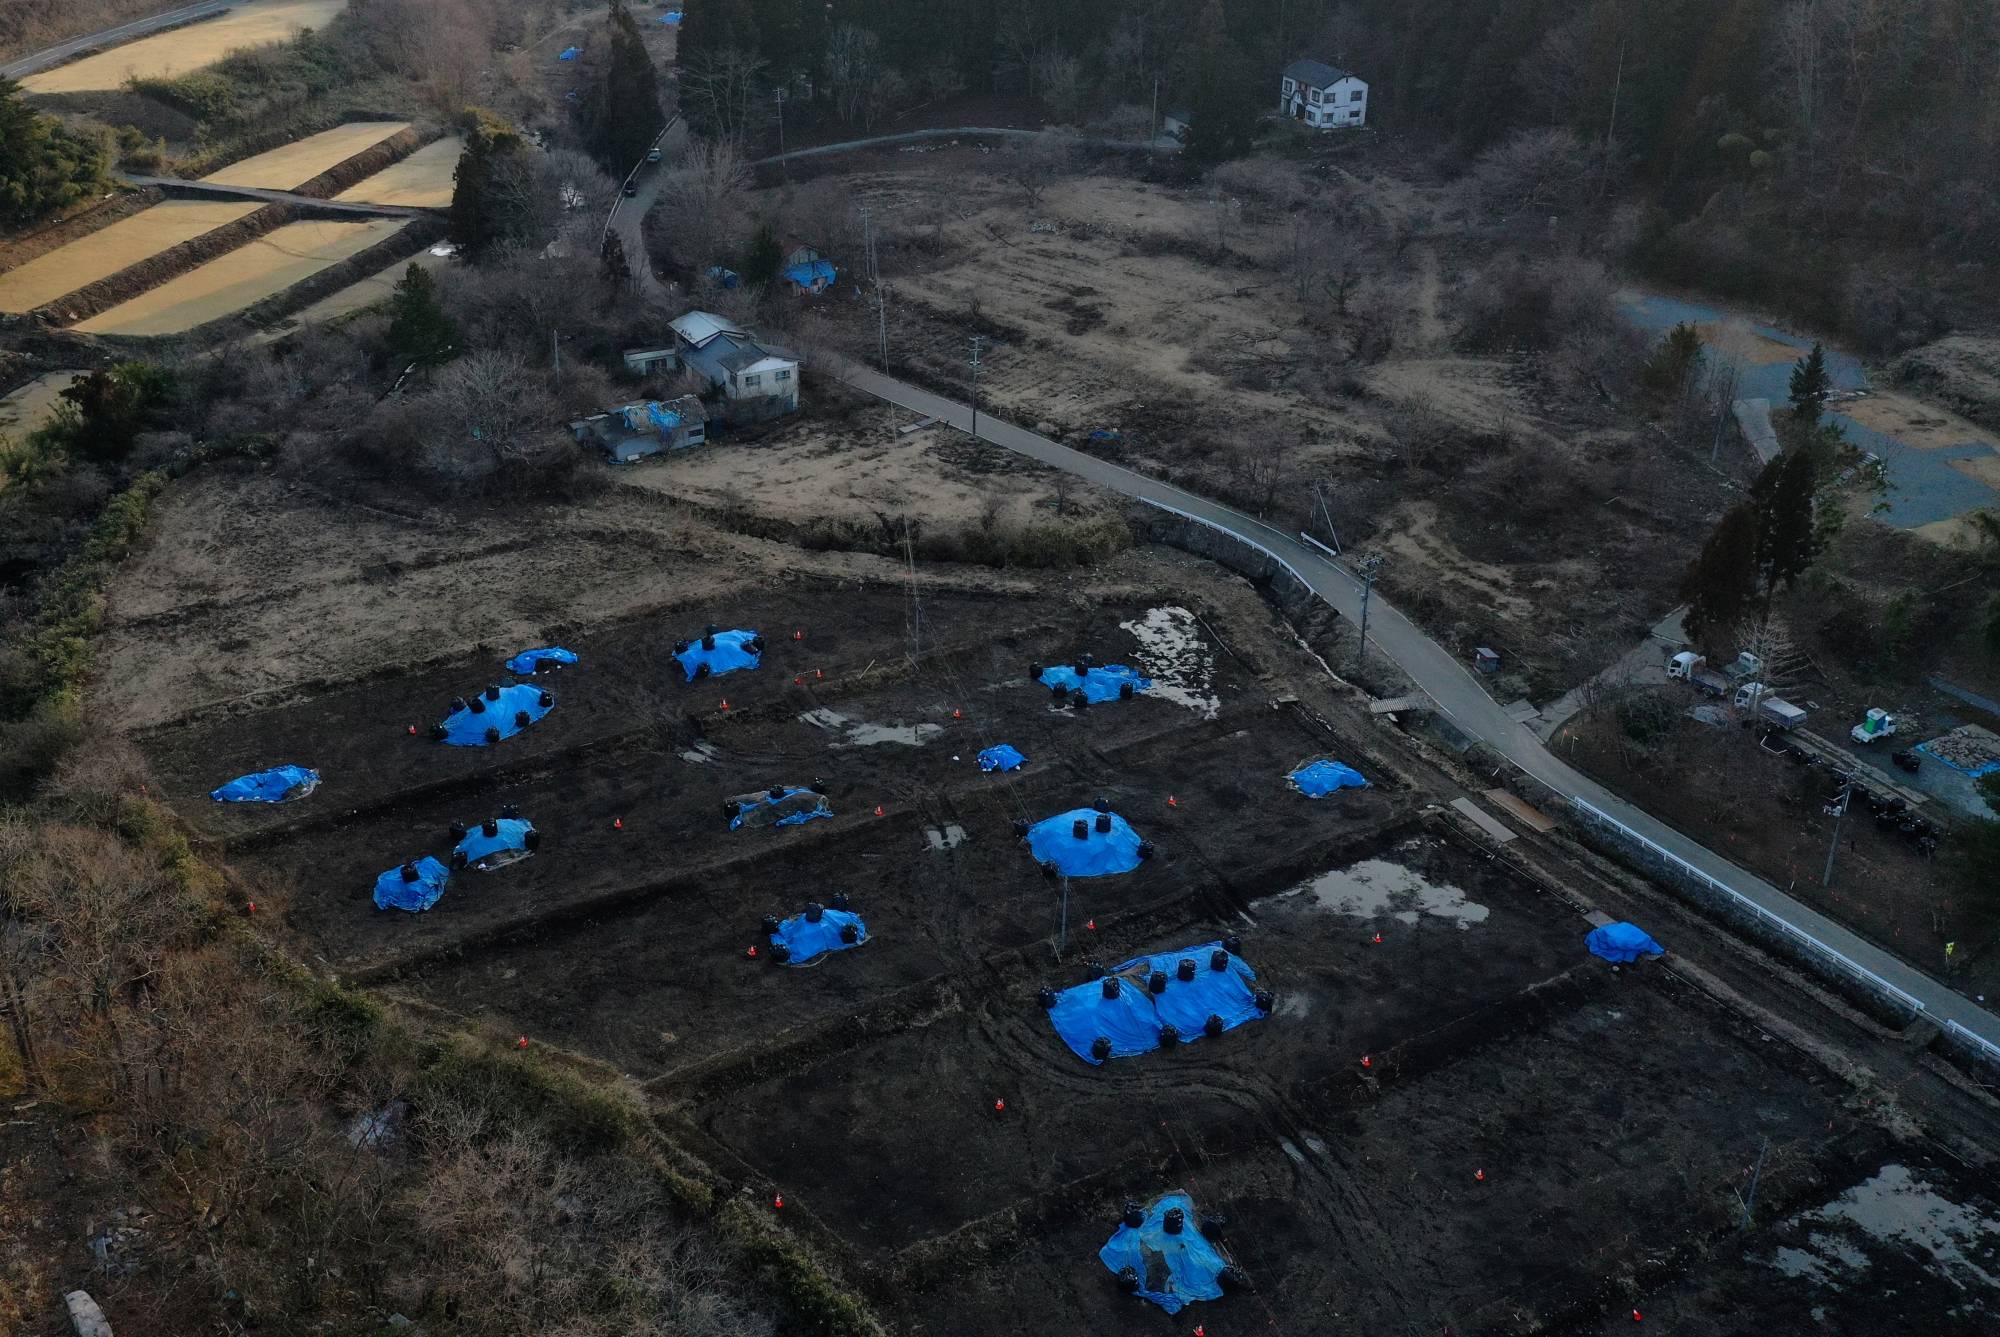 Sakae Kato's house stands close to a field which is being decontaminated in a restricted zone in Fukushima Prefecture. | REUTERS